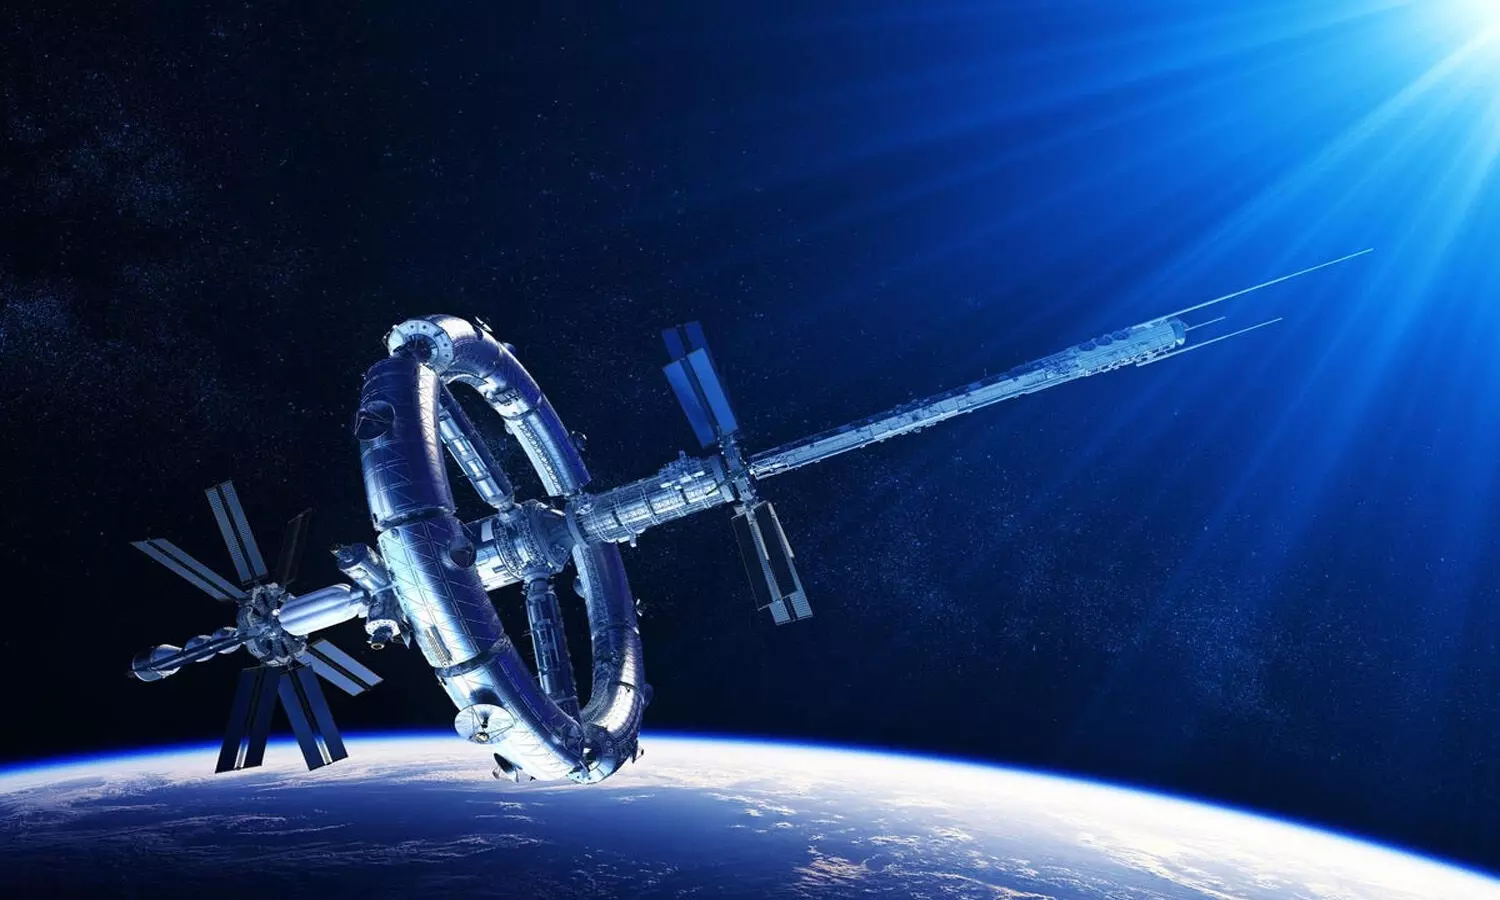 China plans to set up megastructures in Space; may include solar plants & tourism complexes